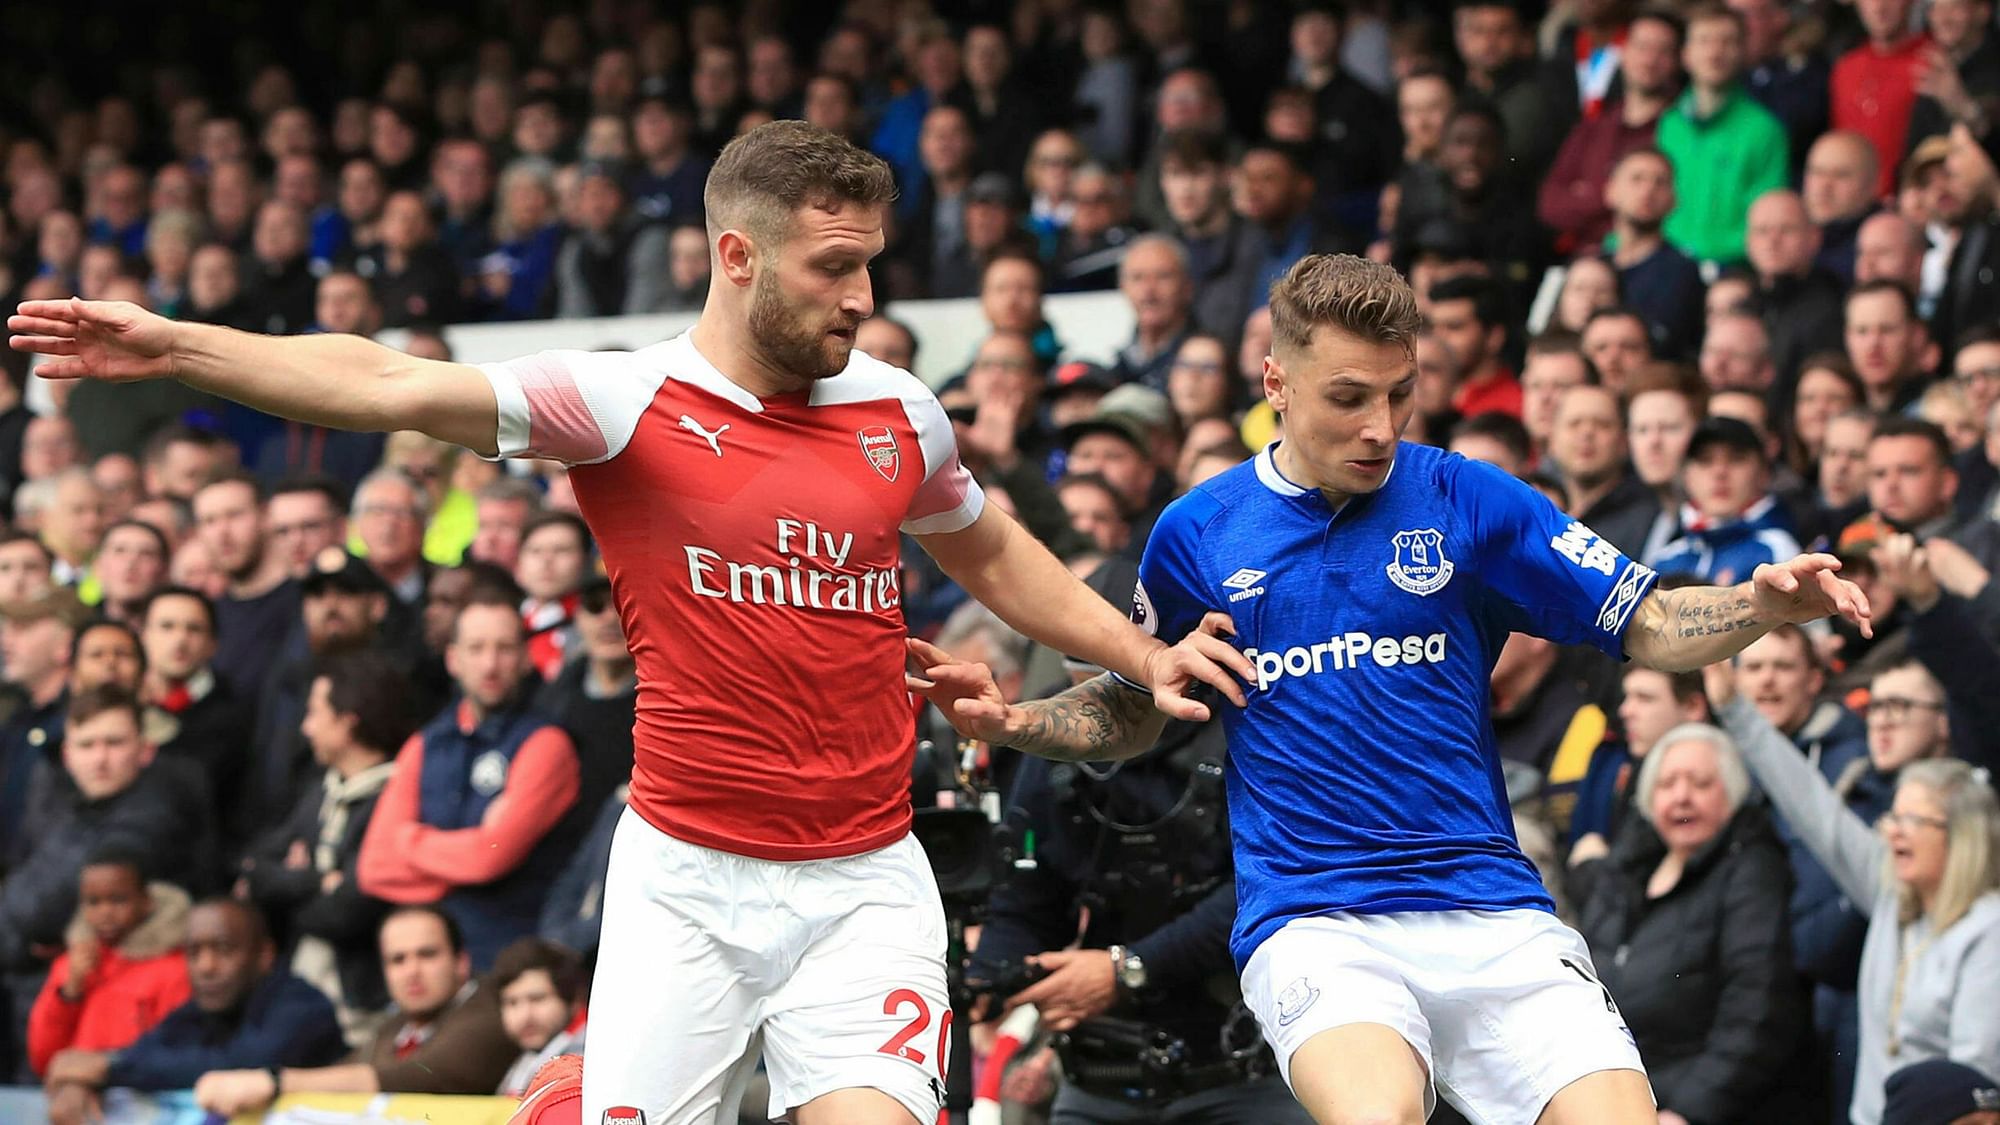 Arsenal’s Shkodran Mustafi, left, and Everton’s Lucas Digne battle for the ball during their English Premier League soccer match at Goodison Park, Liverpool, England, Sunday, April 7, 2019.&nbsp;